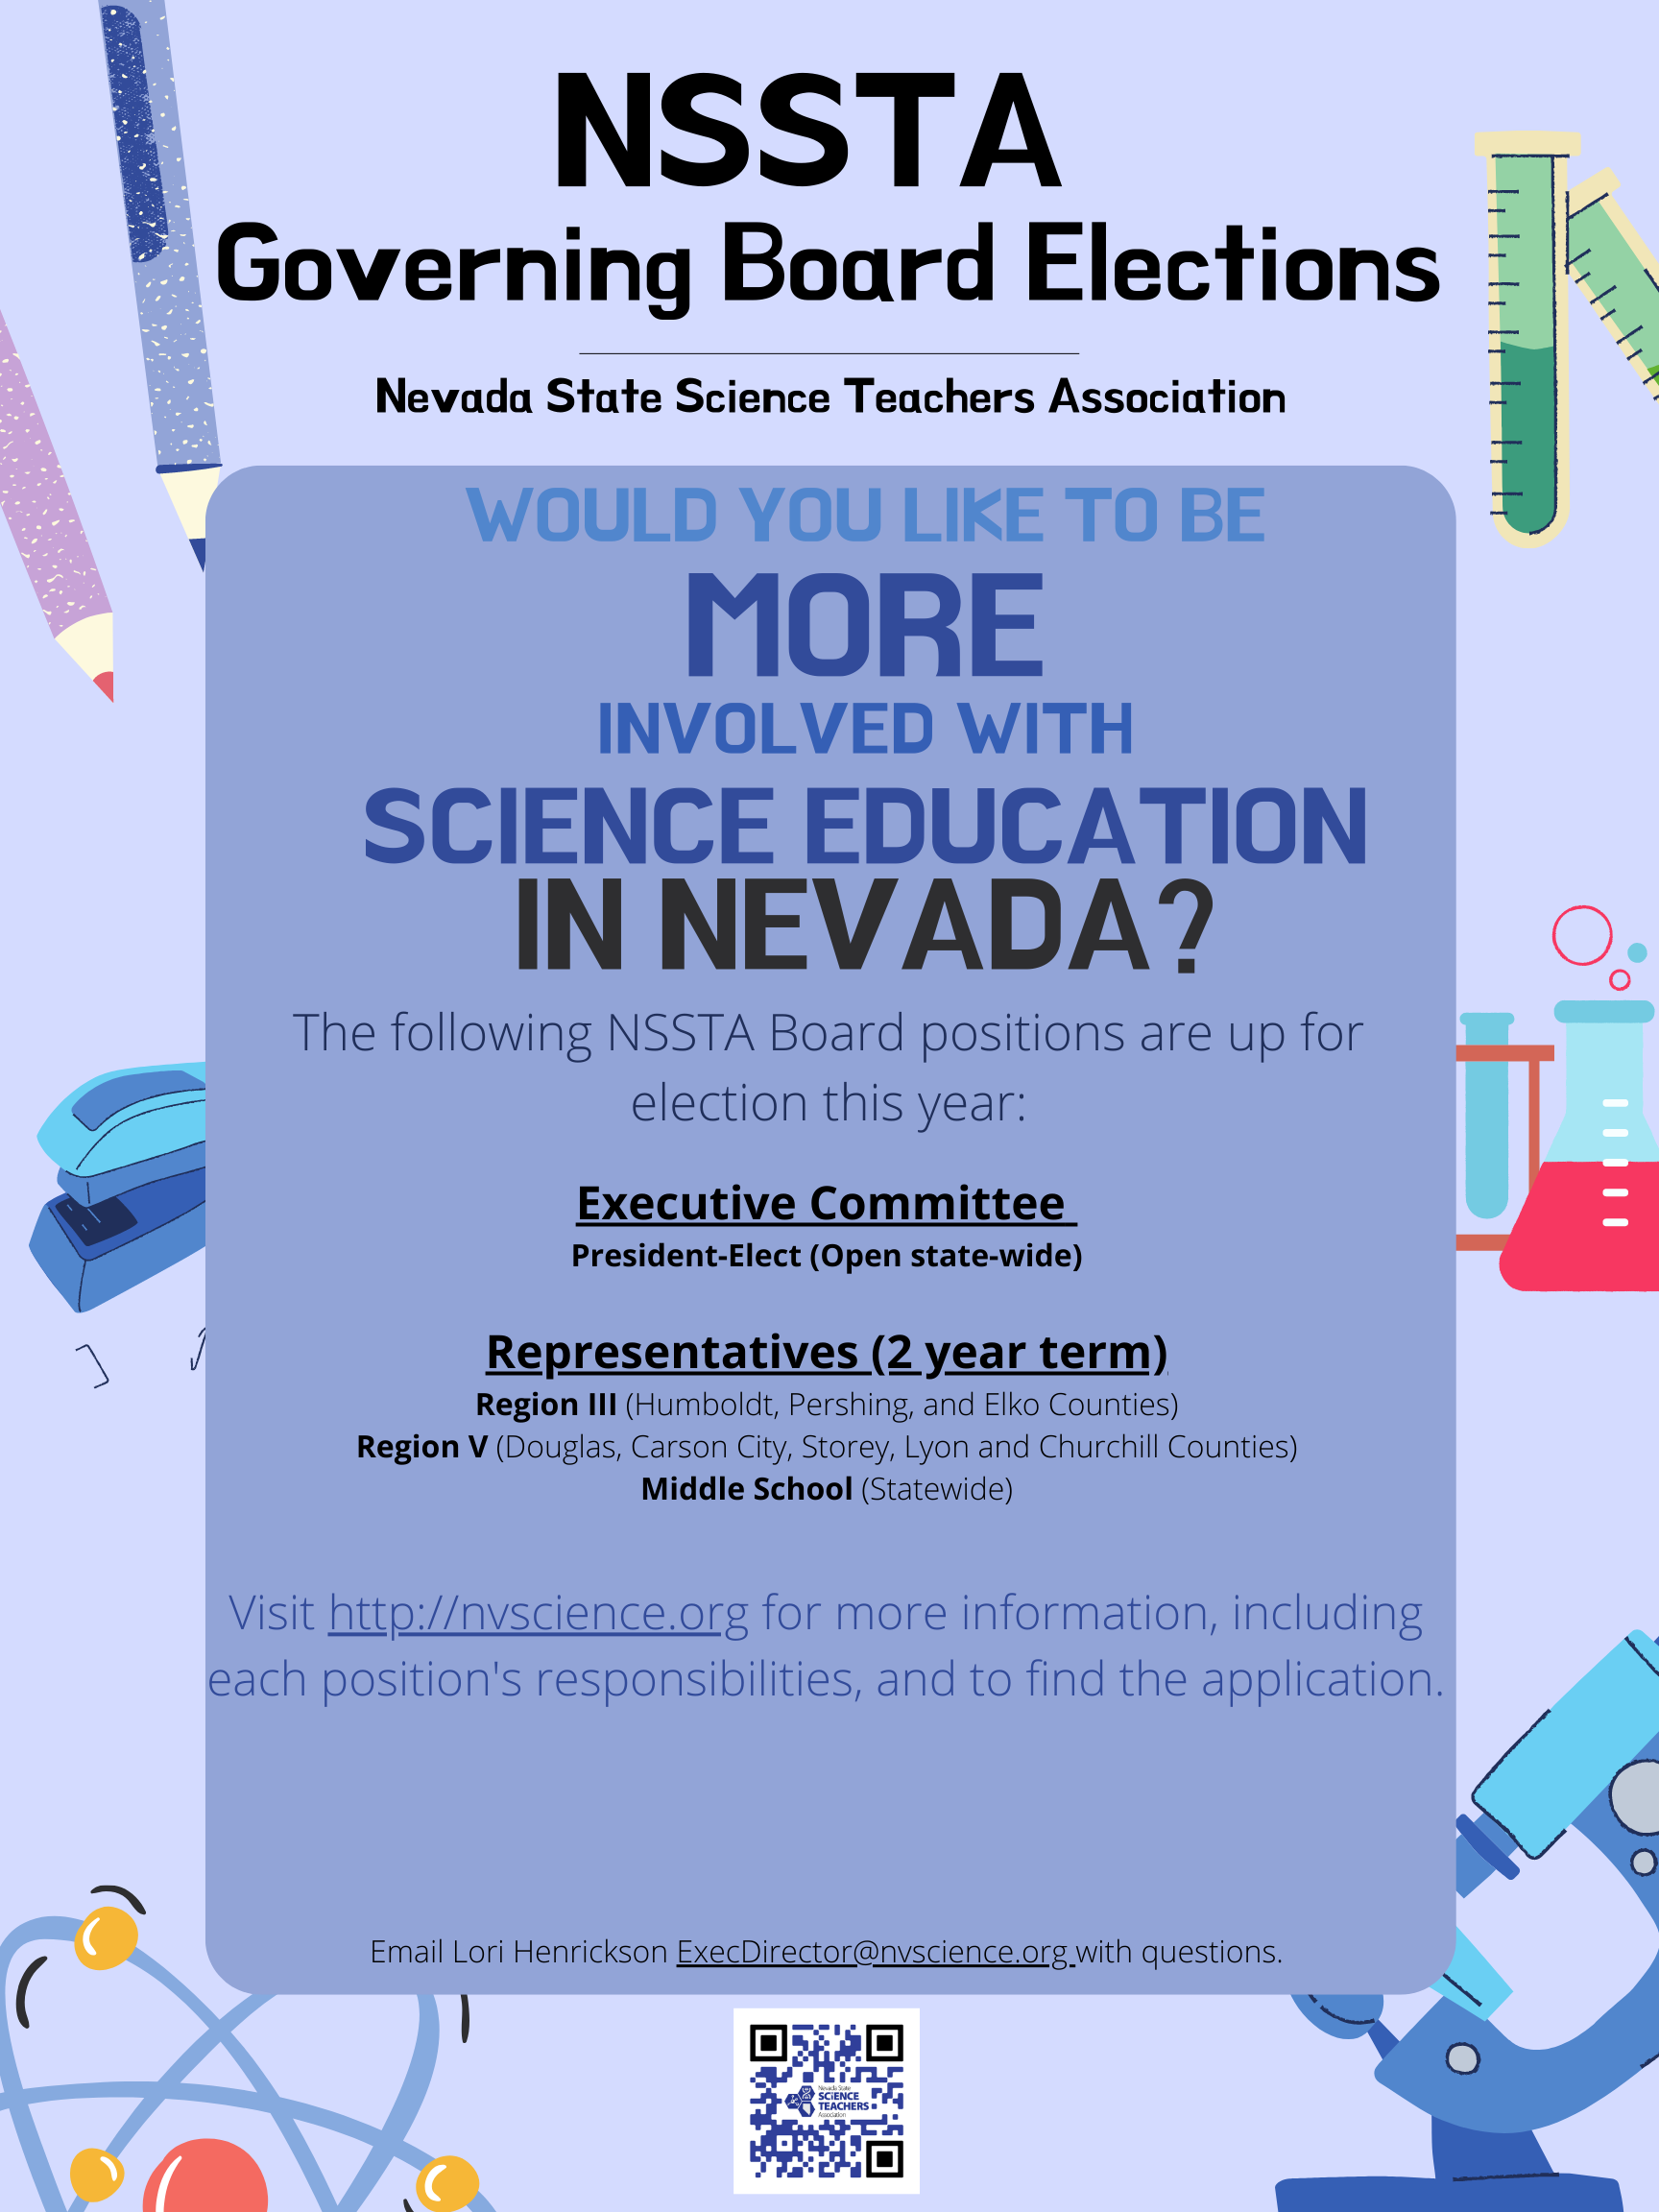 Would you like to be more involved in Science Education in Nevada? The following NSSTA Board positions are up for election this year:  2022-2024 President-Elect (Region III, IV, V)  This position then would turn into President for 2024-2026, then Past-President for 2026-2028.  2022-2024 Membership Coordinator (statewide) This would be finishing the last two years of a three-year term vacated by our past Membership Coordinator who moved out of state.   2022-2024 Region I (Clark) Representative Region III (Humboldt, Pershing, Elko) Region V (Douglas, Carson City, Storey, Lyon and Churchill) Middle School Representative (statewide).    